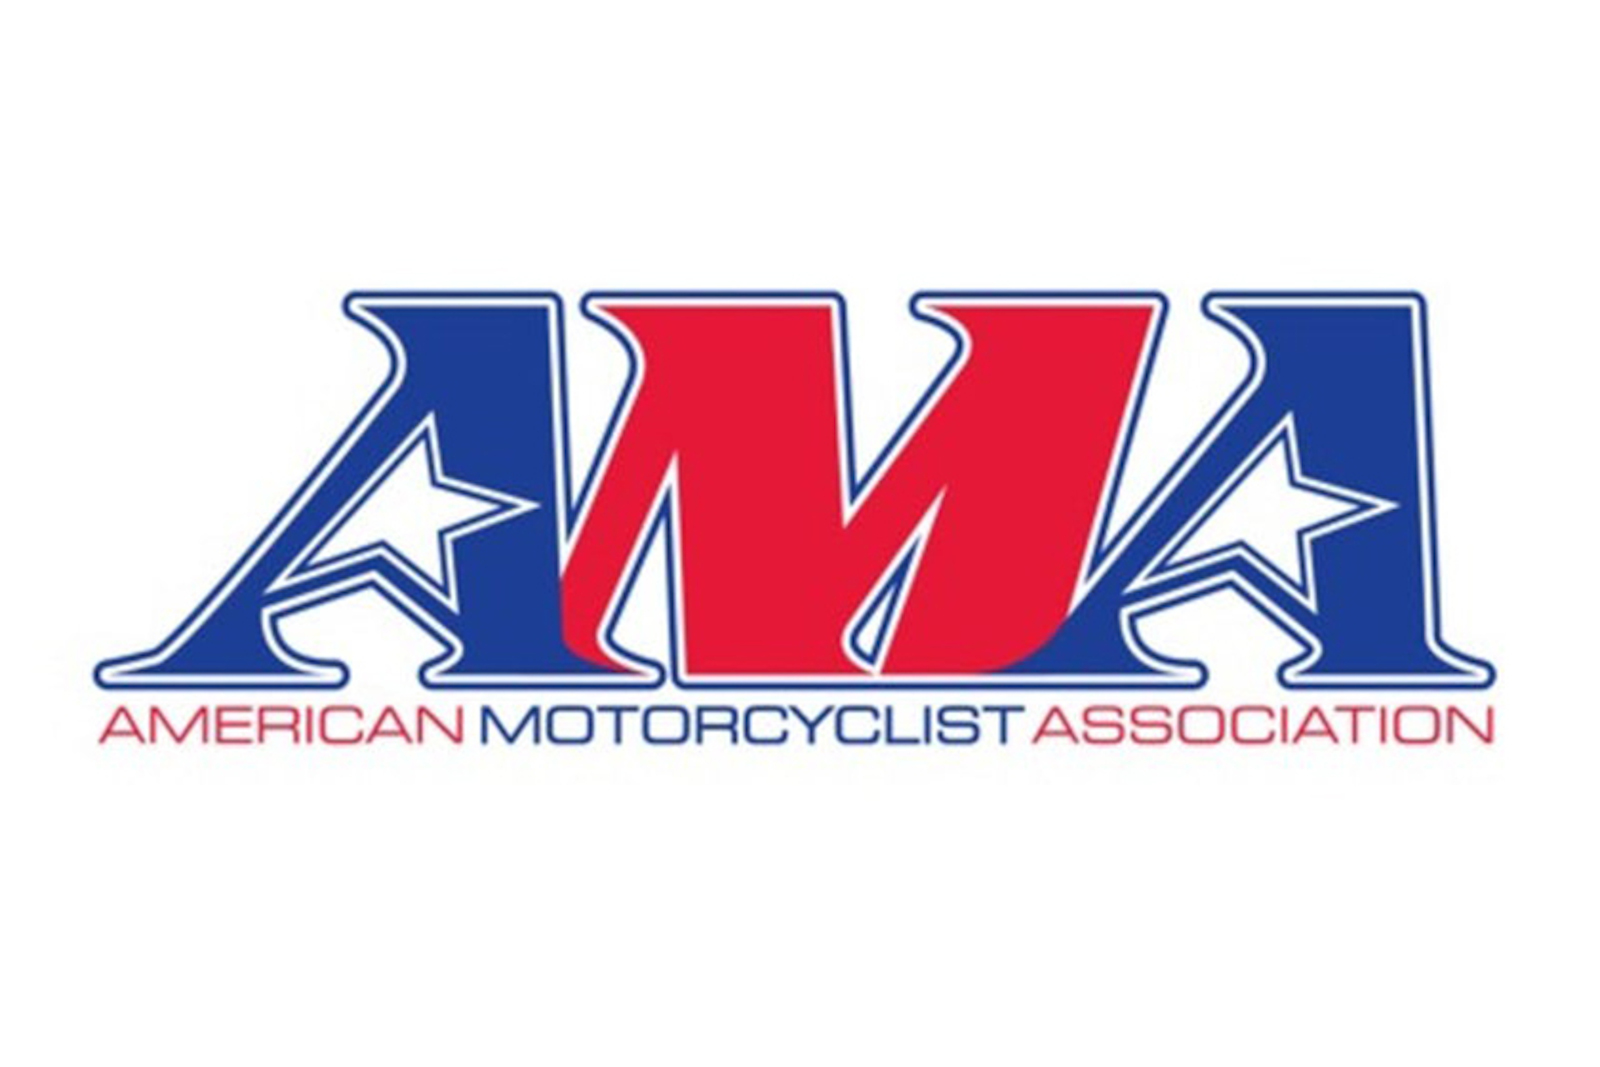 “Get out there and ride” says AMA President, Rob Dingman 